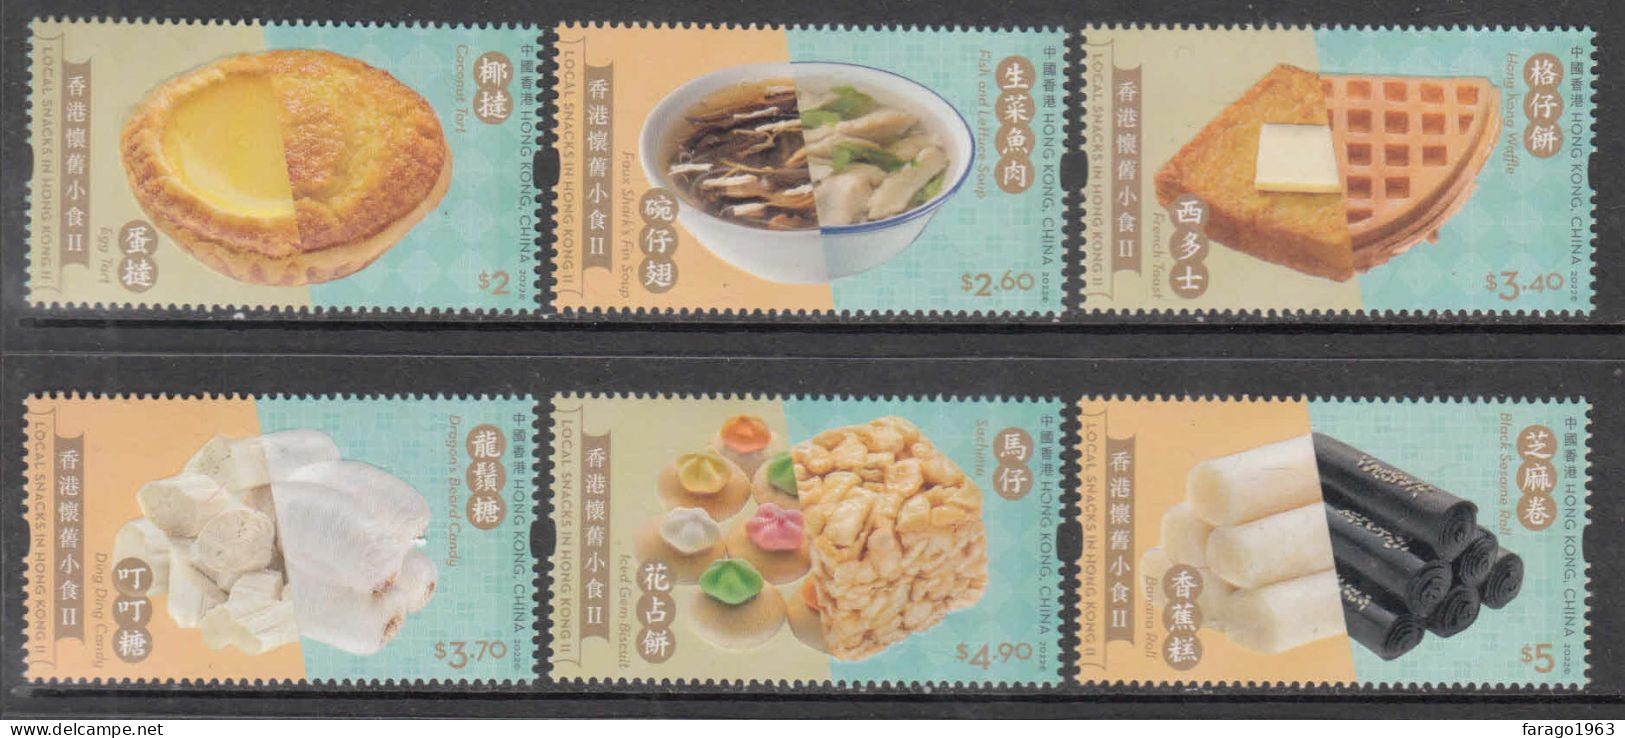 2022 Hong Kong Local Snacks Gastronomie  Complete Set Of 6 MNH @  FACE VALUE - Ungebraucht